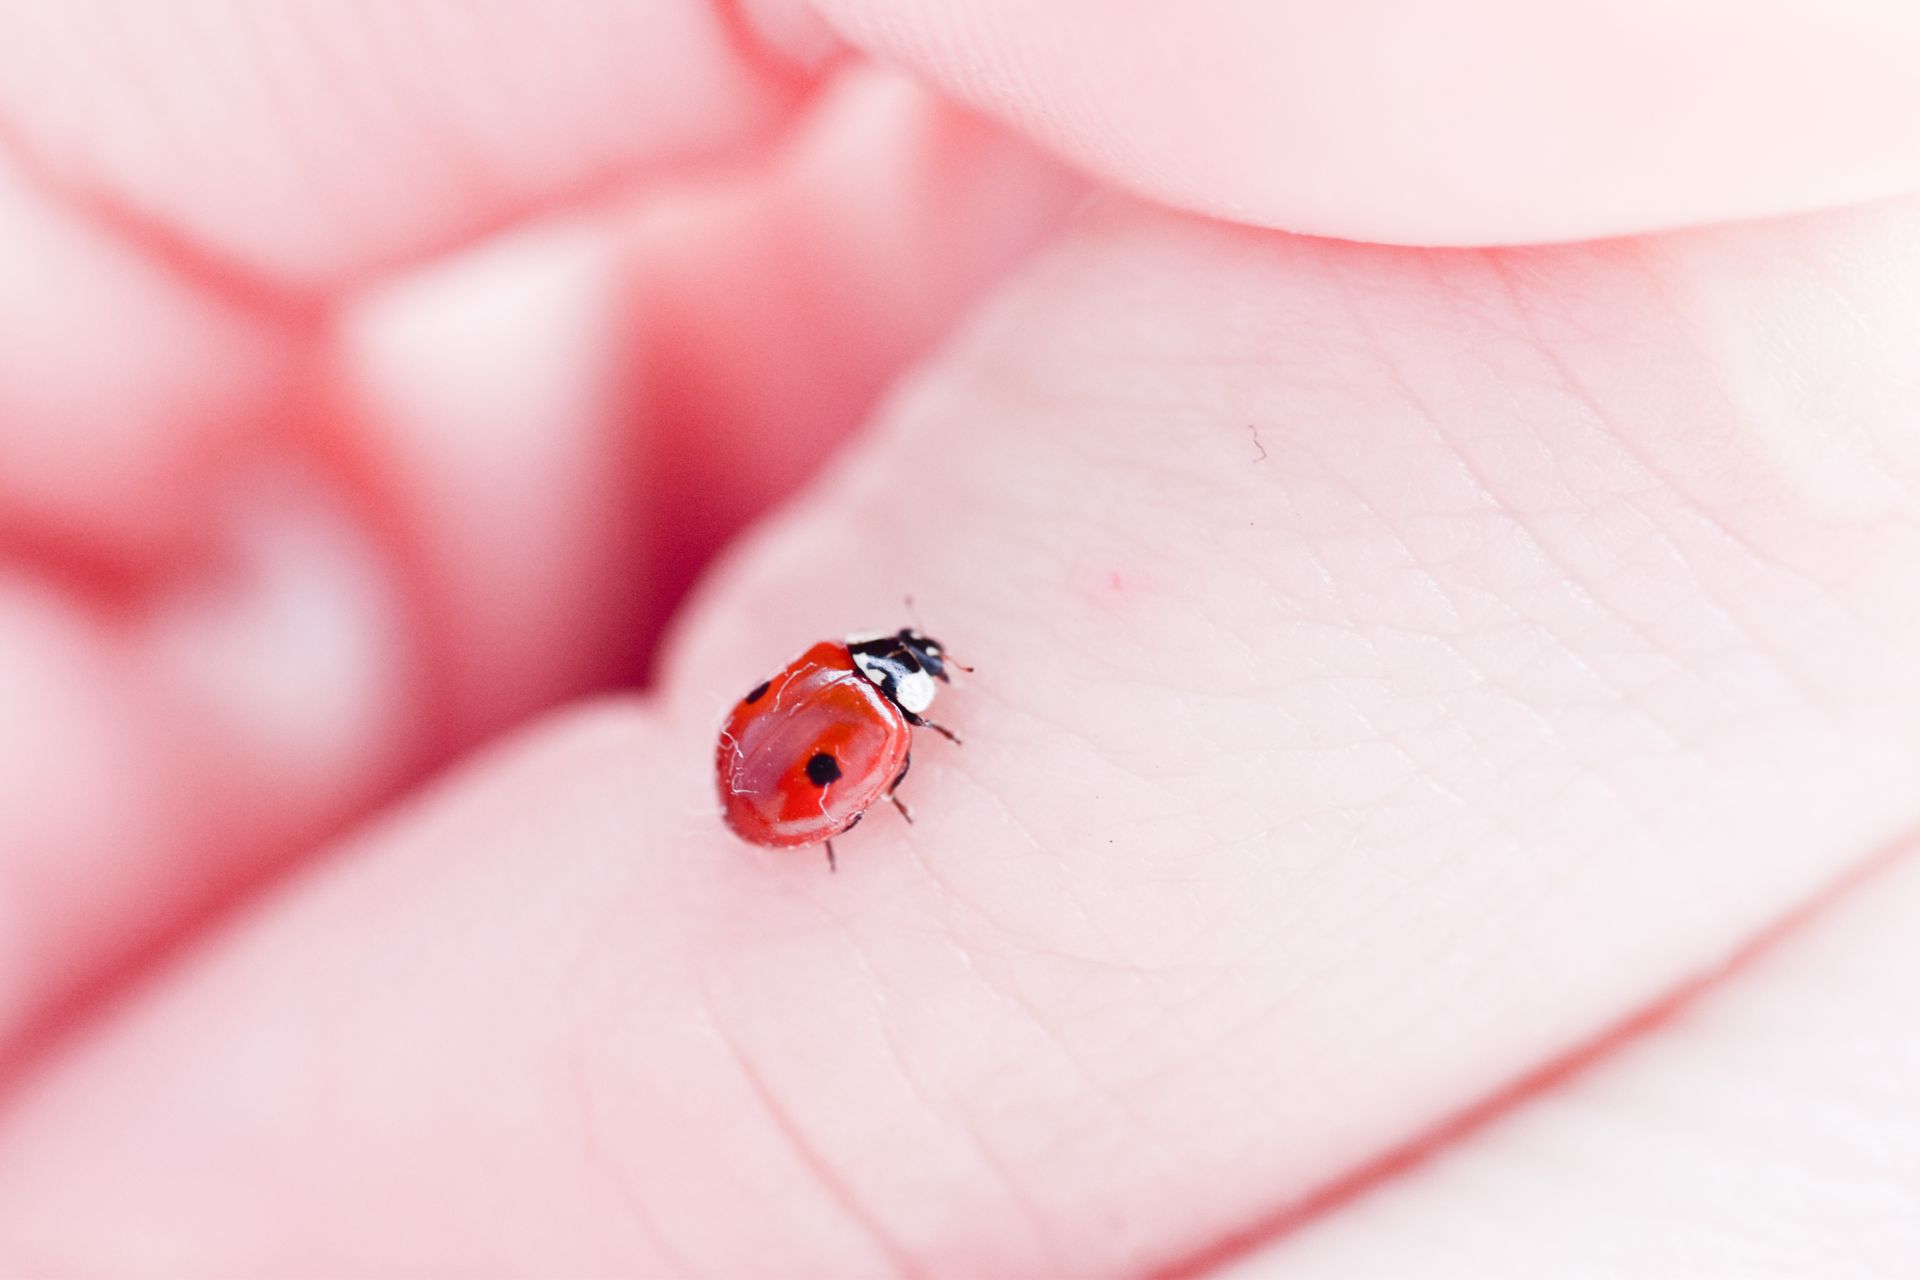 A two spotted ladybug is sitting on a person 's finger.